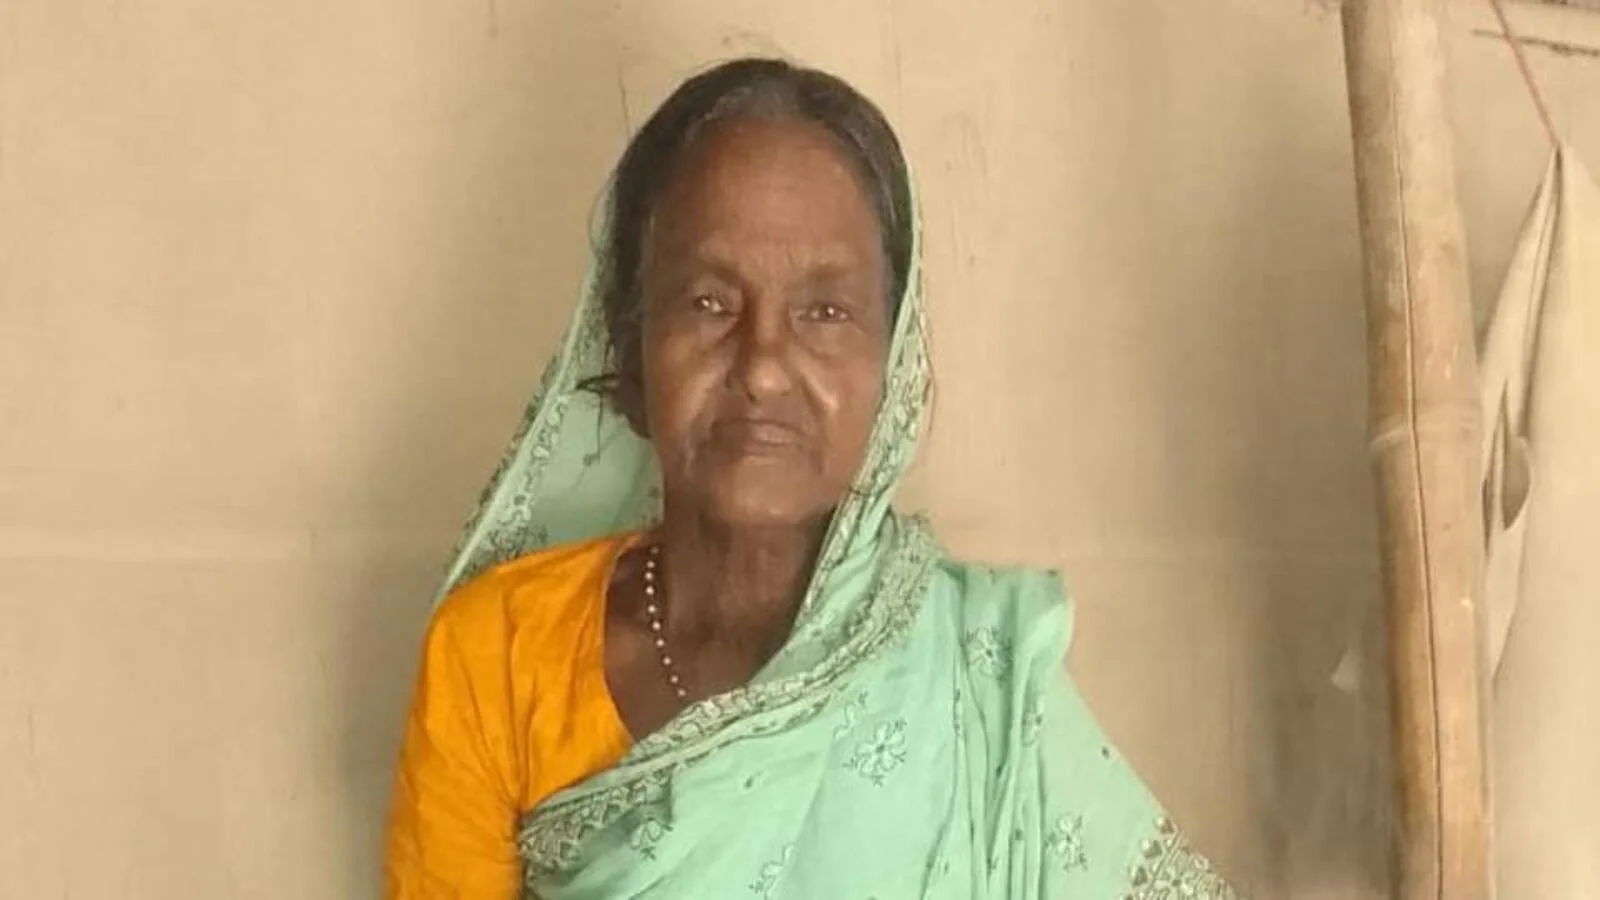 80-yr-old Assam woman who lost her son over citizenship asked to prove she’s Indian